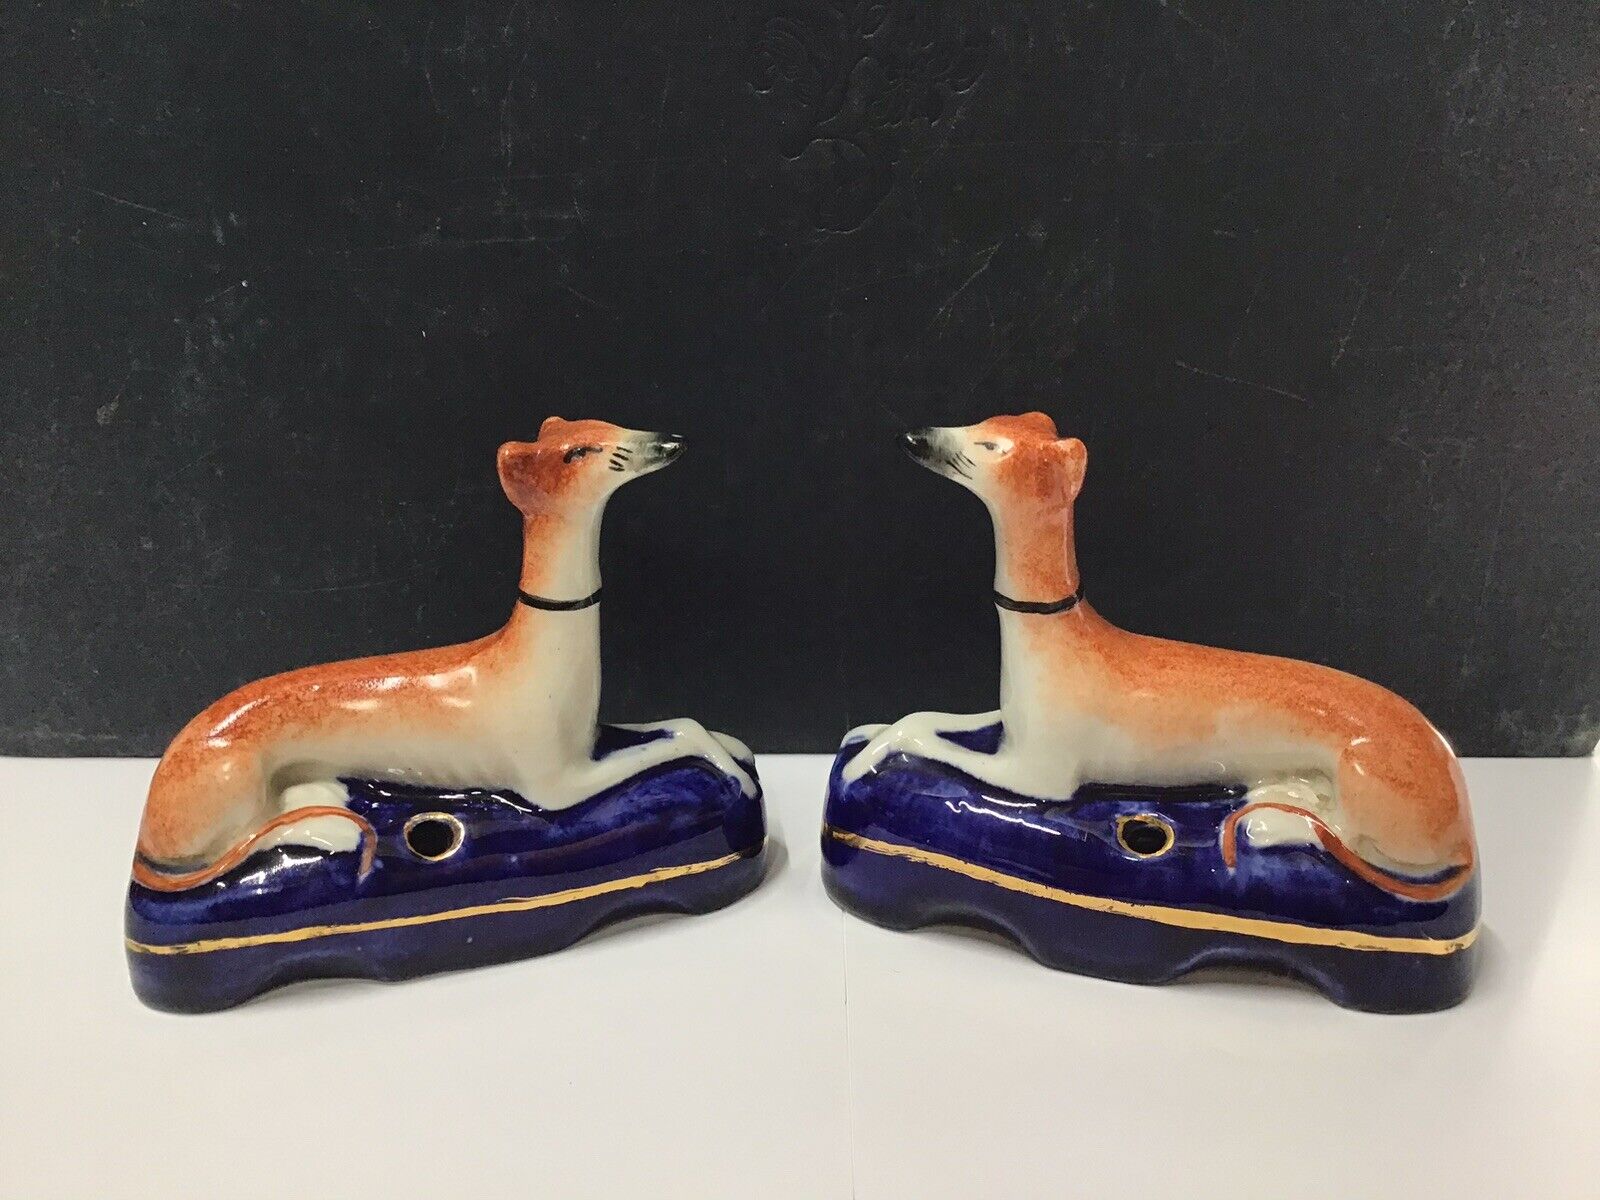 Pair of Antique Victorian Staffordshire Whippet Dog Figurines w/ Inkwells